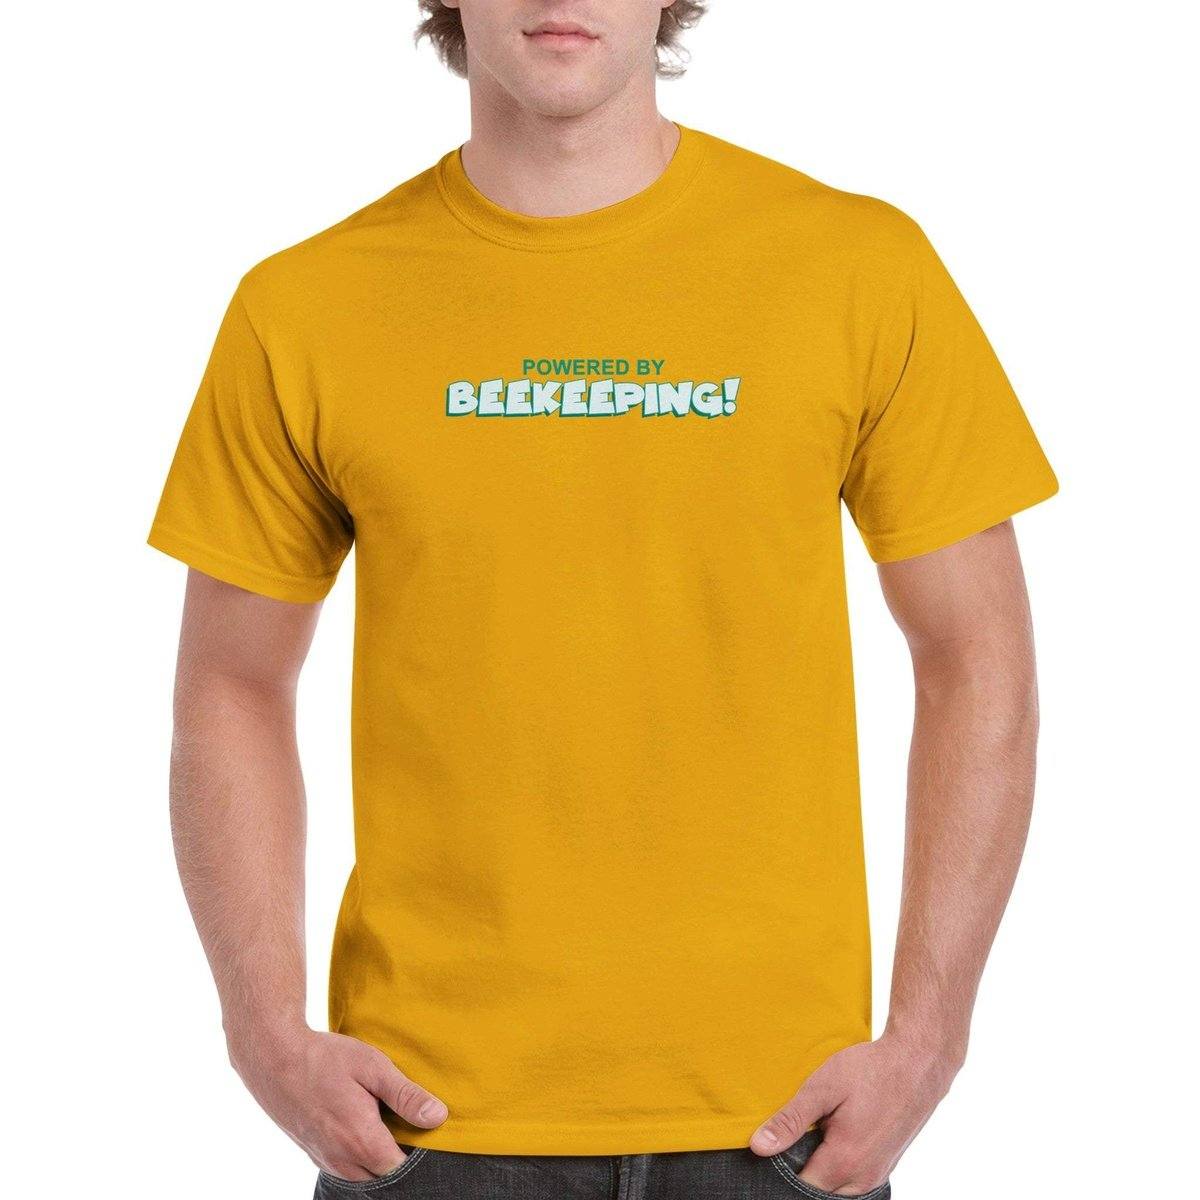 Powered By Beekeeping T-Shirt - funny beekeeper Tshirt - Unisex Crewneck T-shirt Australia Online Color Gold / S